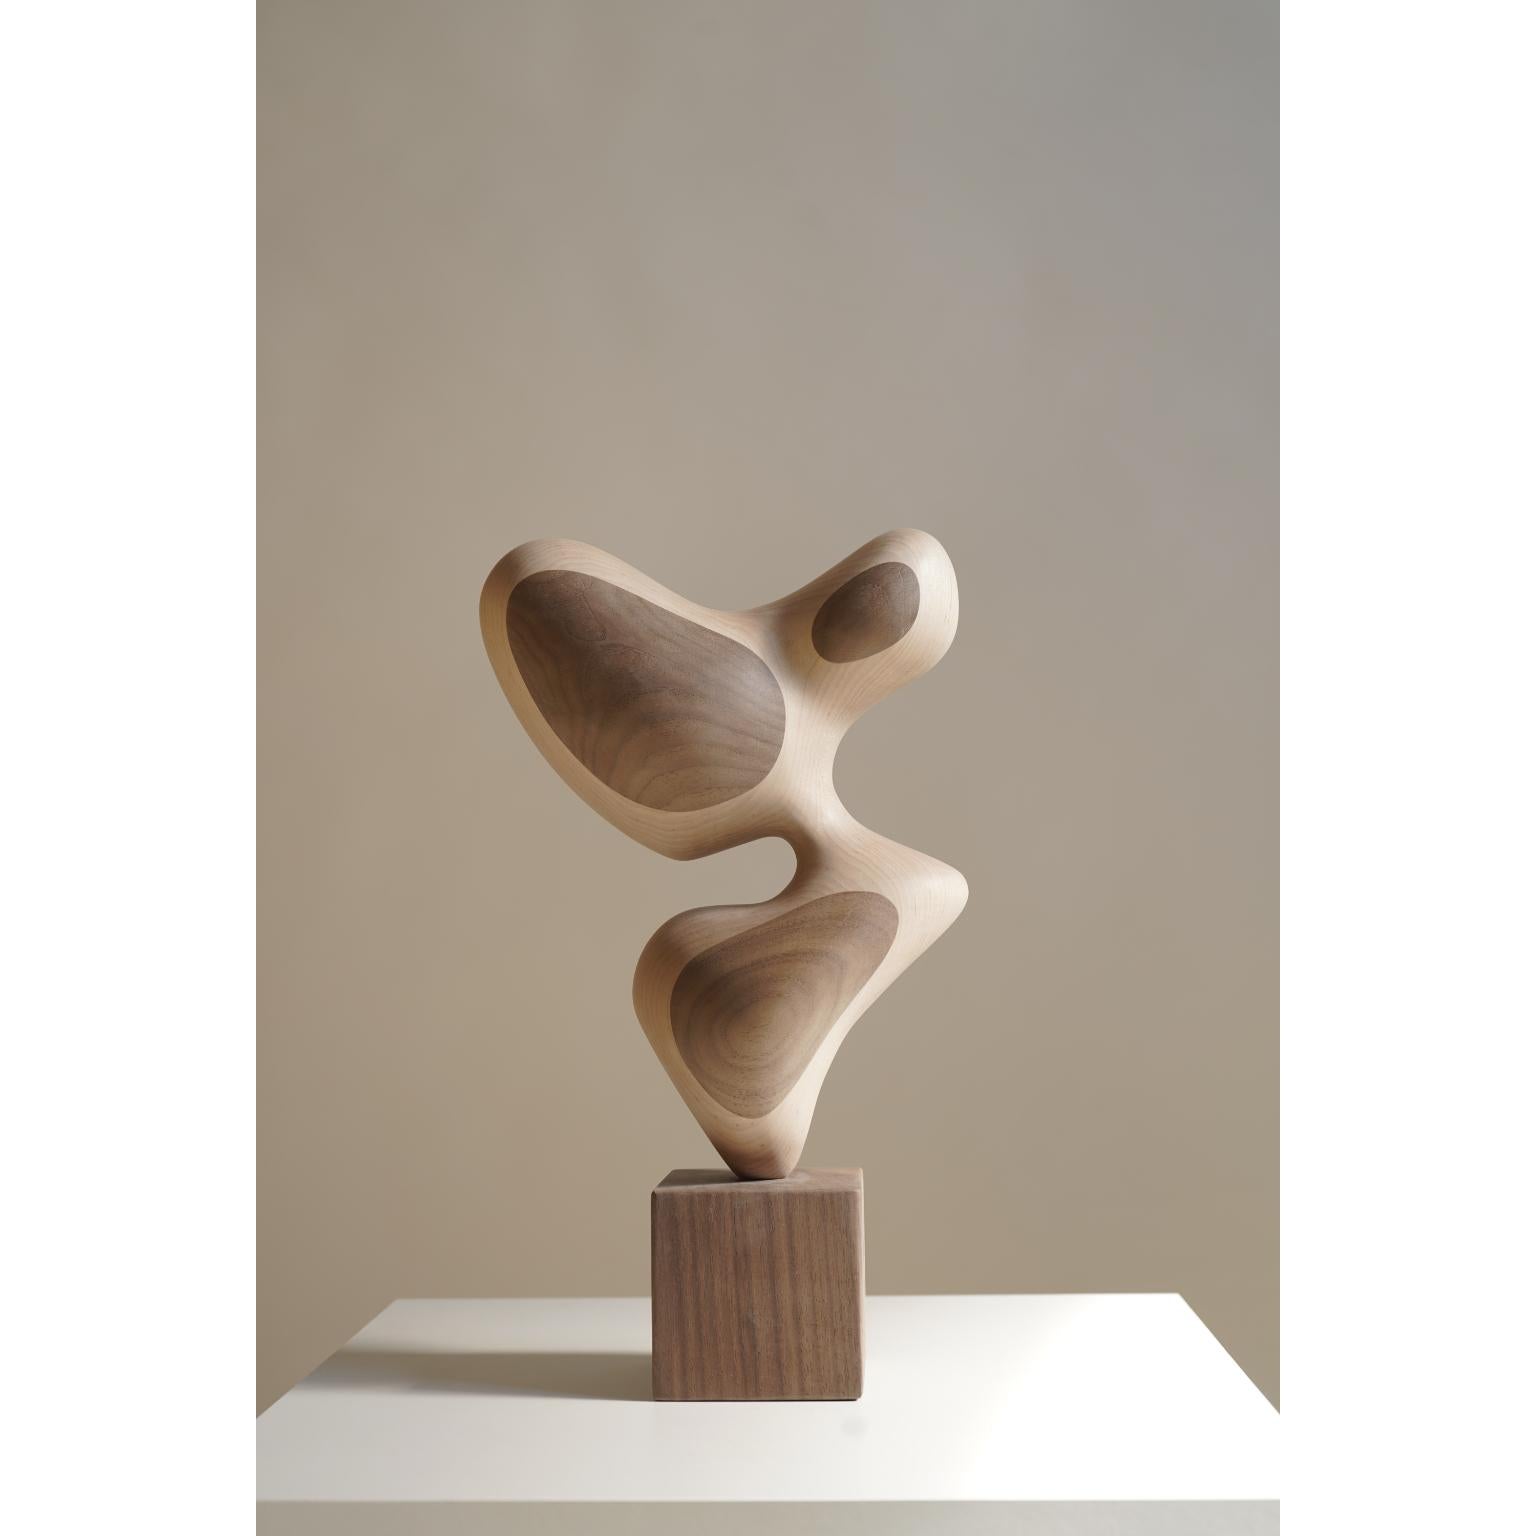 Jubokko Sculpture by Chandler McLellan
Limited Edition of 8 Pieces.
Dimensions: D 10.2 x W 20.3 x H 34.4 cm. 
Materials: Hard maple and walnut.

Sculptures will be signed and numbered on the bottom of the base. Wood grain will vary, wood species